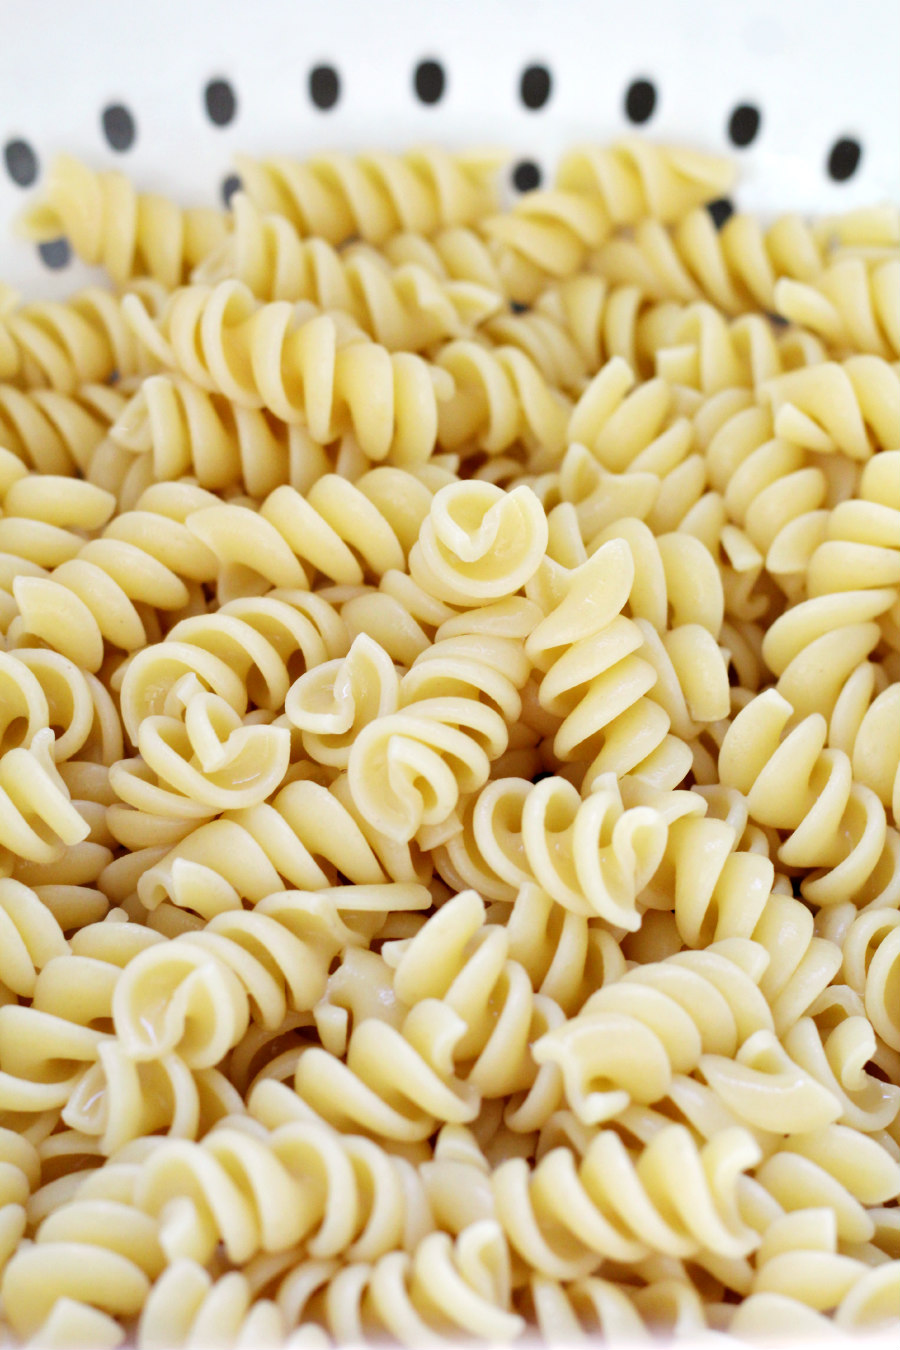 Cooked rotini pasta in a white colander.